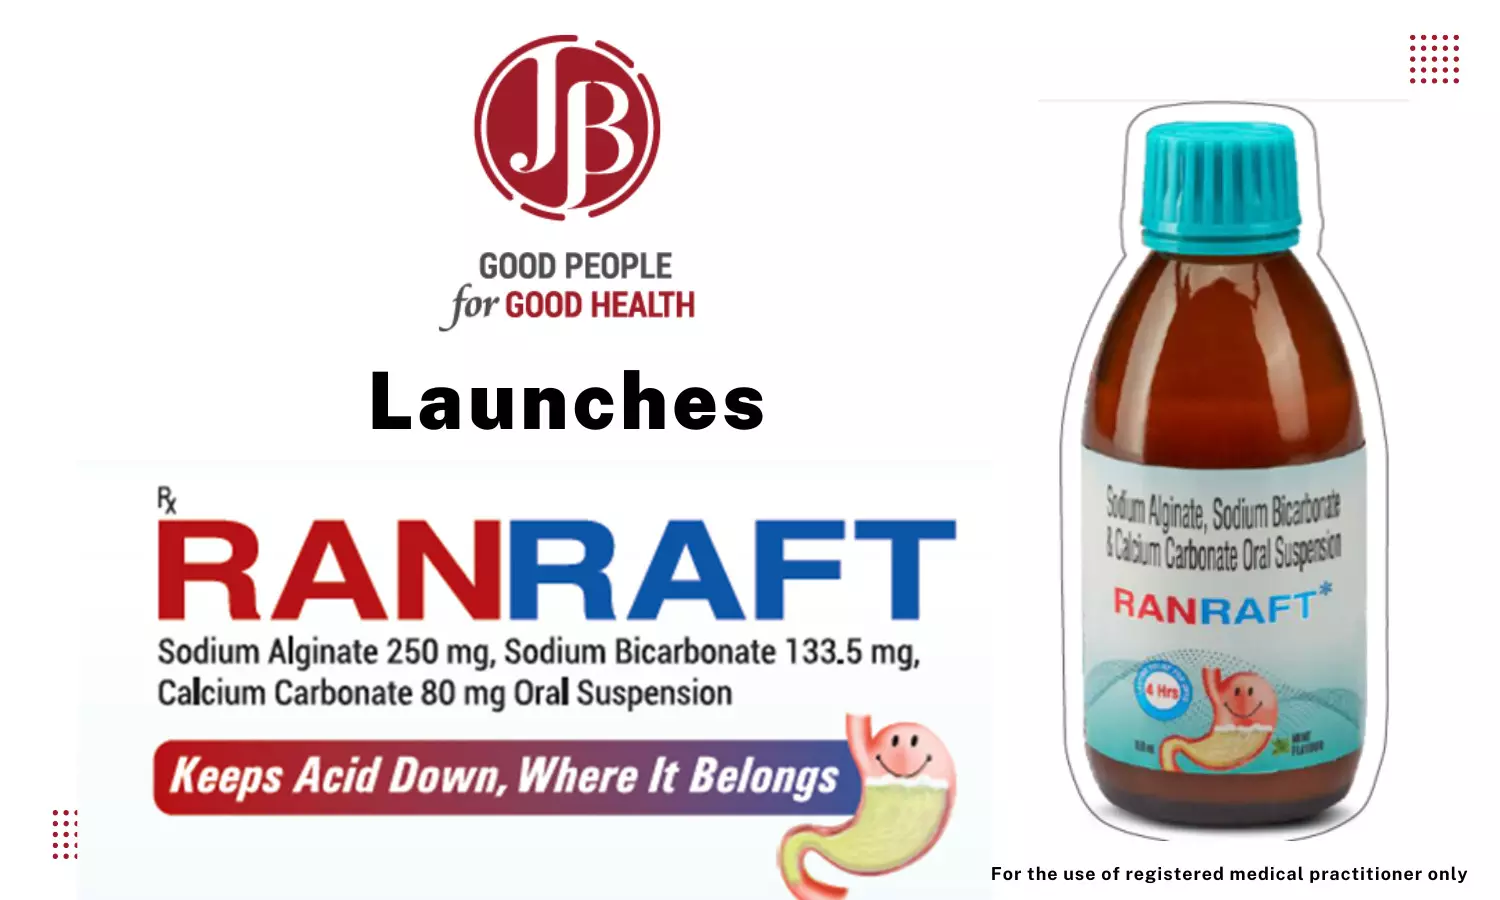 JB Pharma strengthens its position in Gastroenterology with launch of RANRAFT